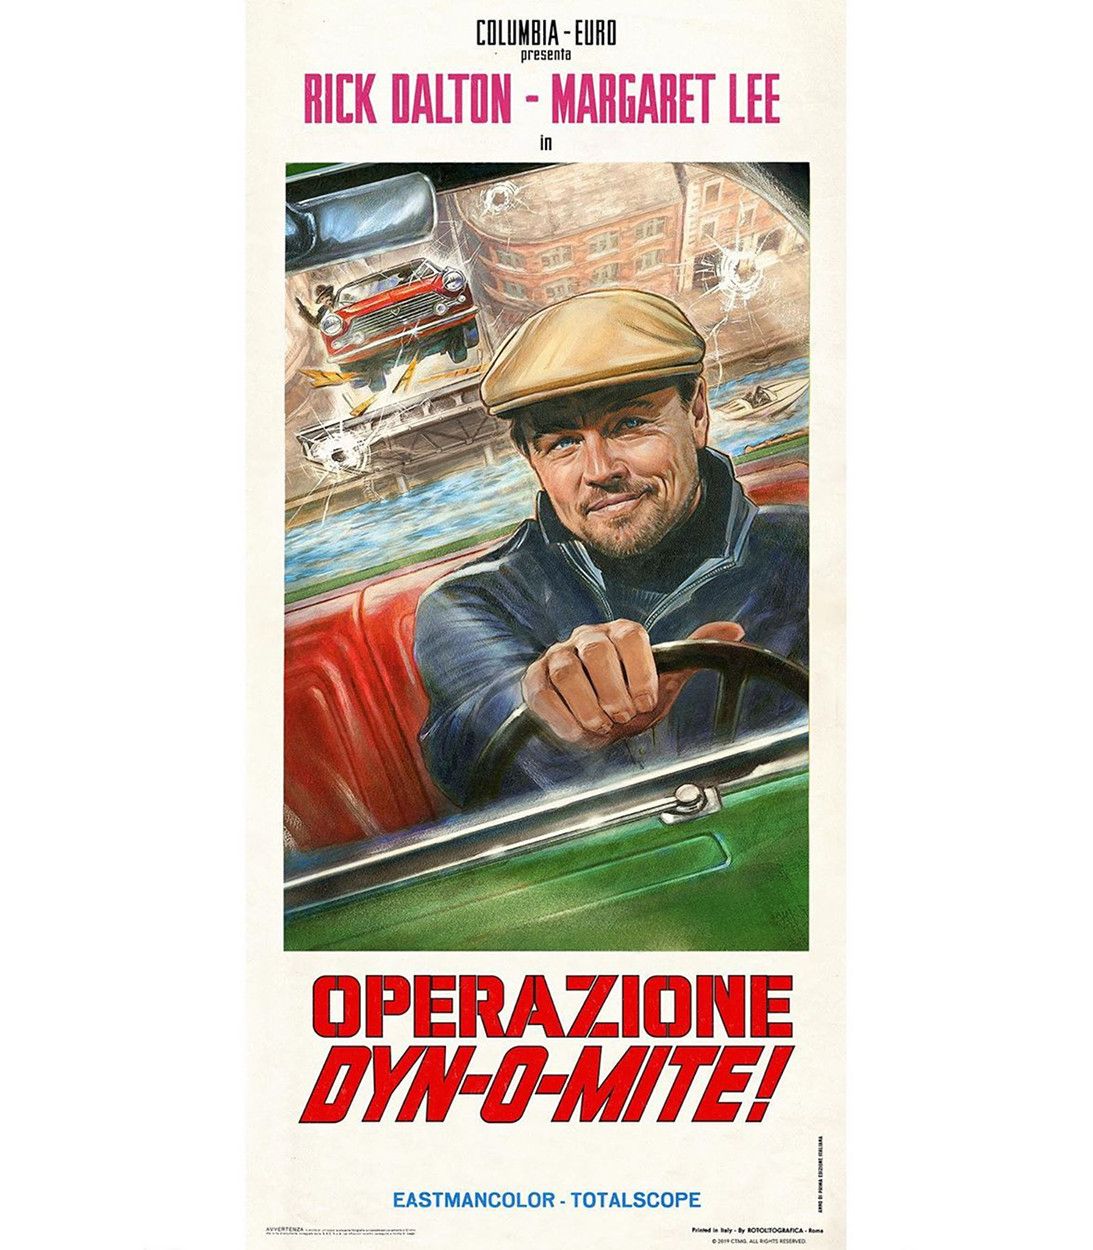 Once Upon a Time in Hollywood Operazione Dyn-O-Mite! Poster